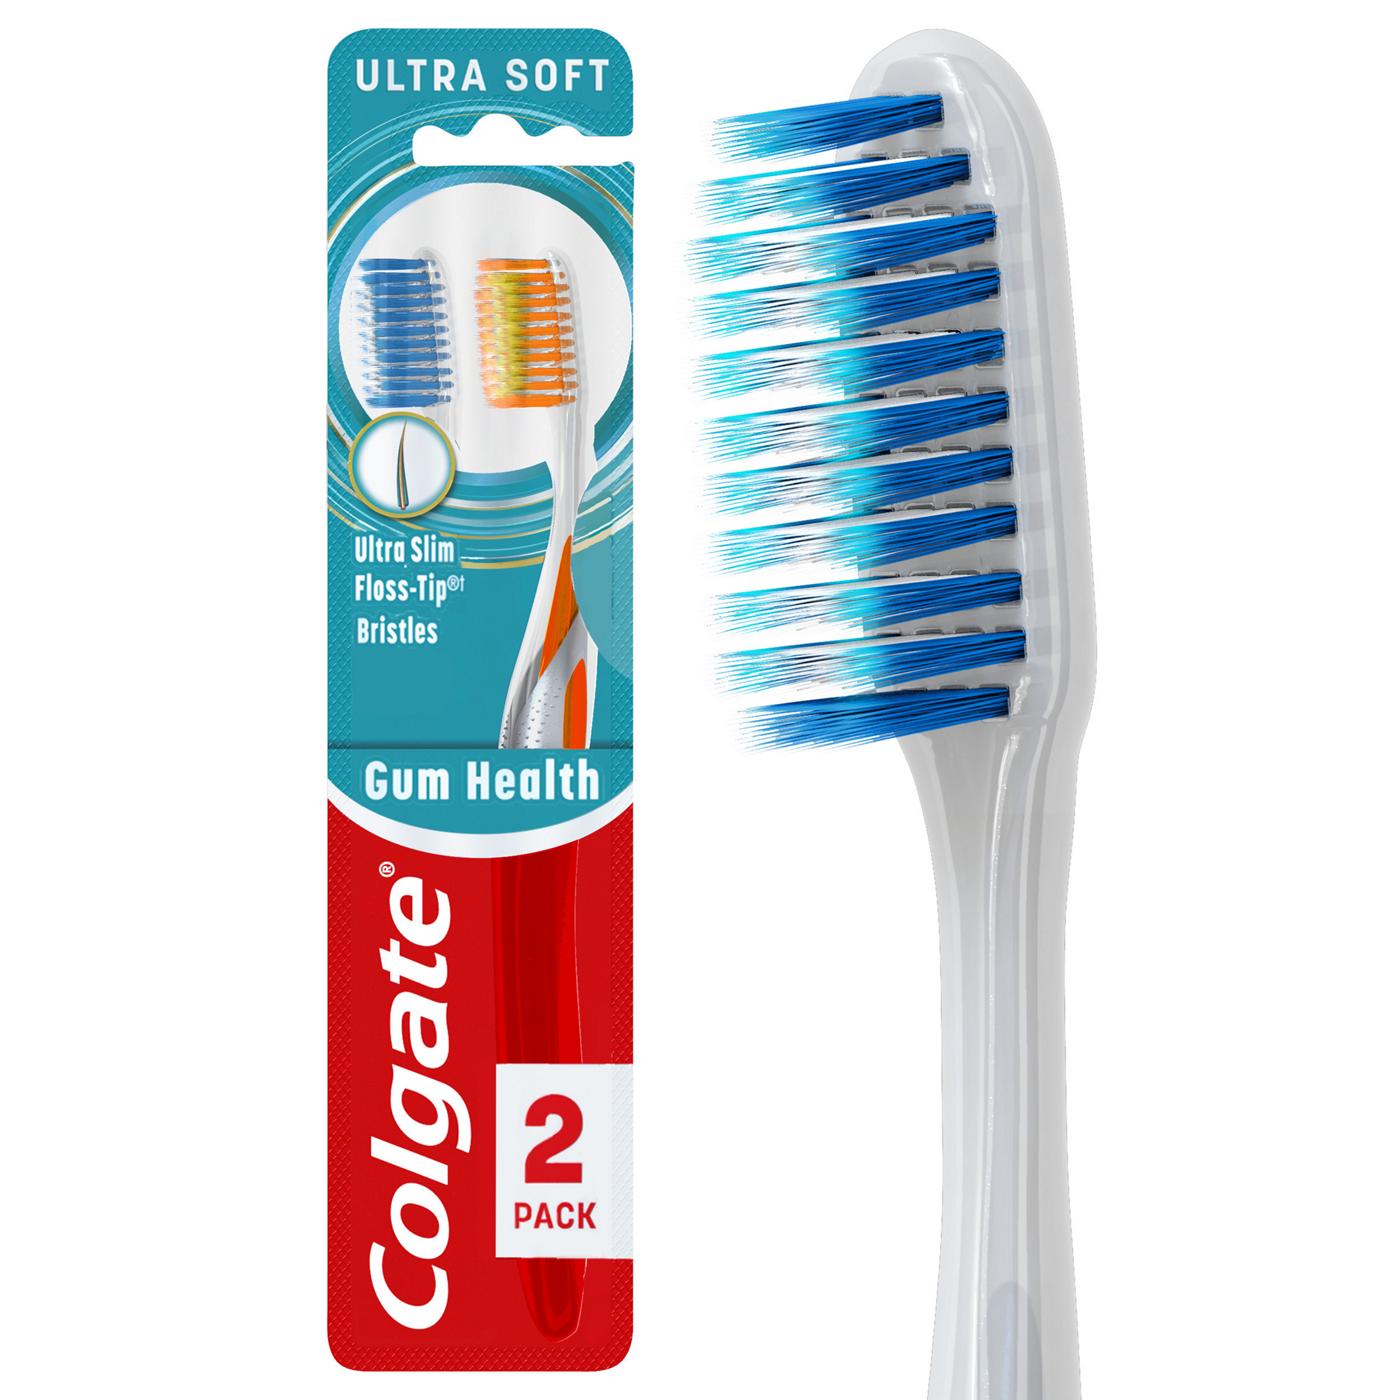 Colgate 360 Gum Health Toothbrush - Ultra Soft; image 4 of 5